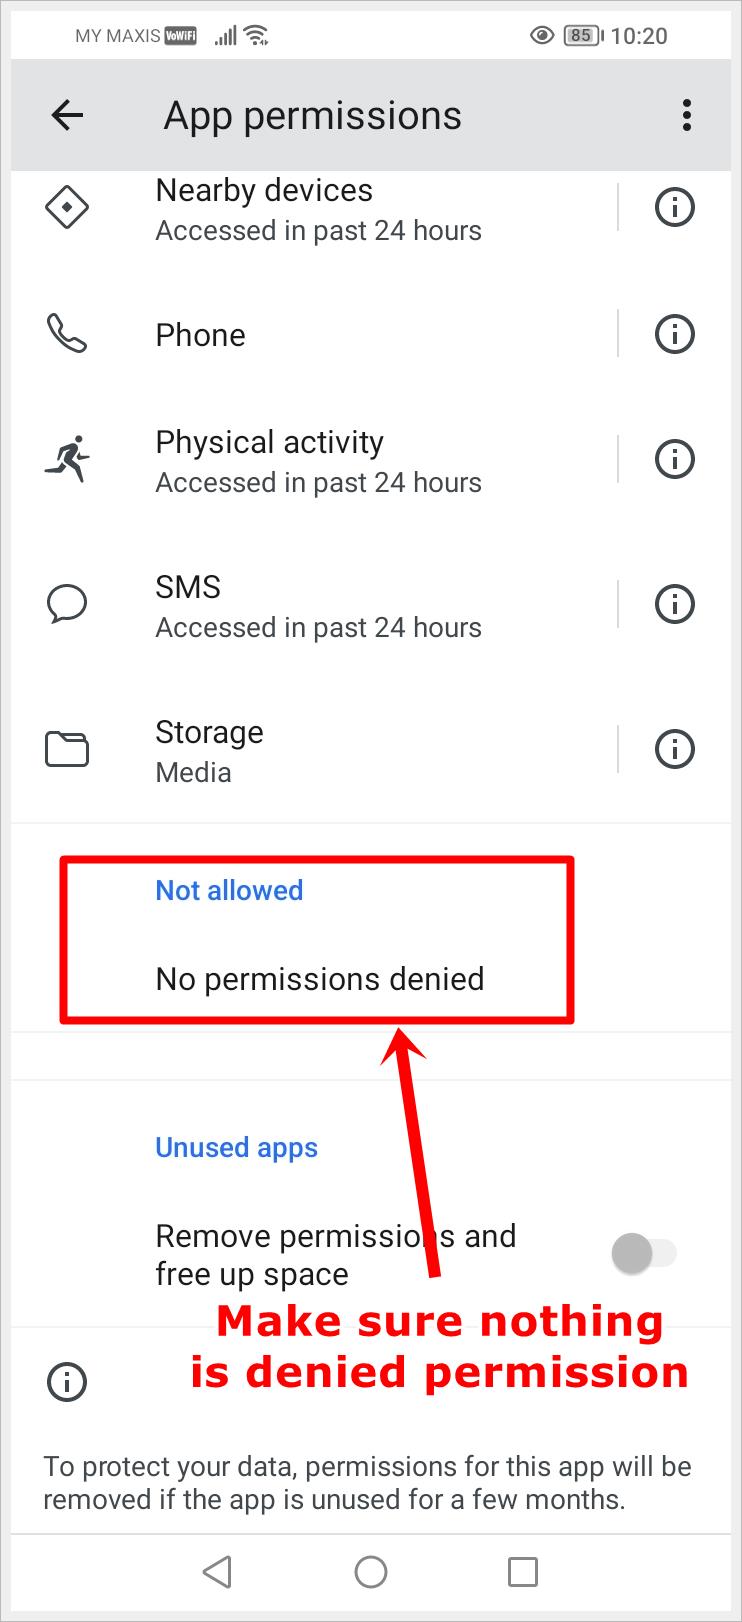 How to Fix "Google Play Services Keeps Stopping" Error: This image displays the Google Play Services App permissions page with the "Not allowed" section highlighted, indicating "No permissions denied."